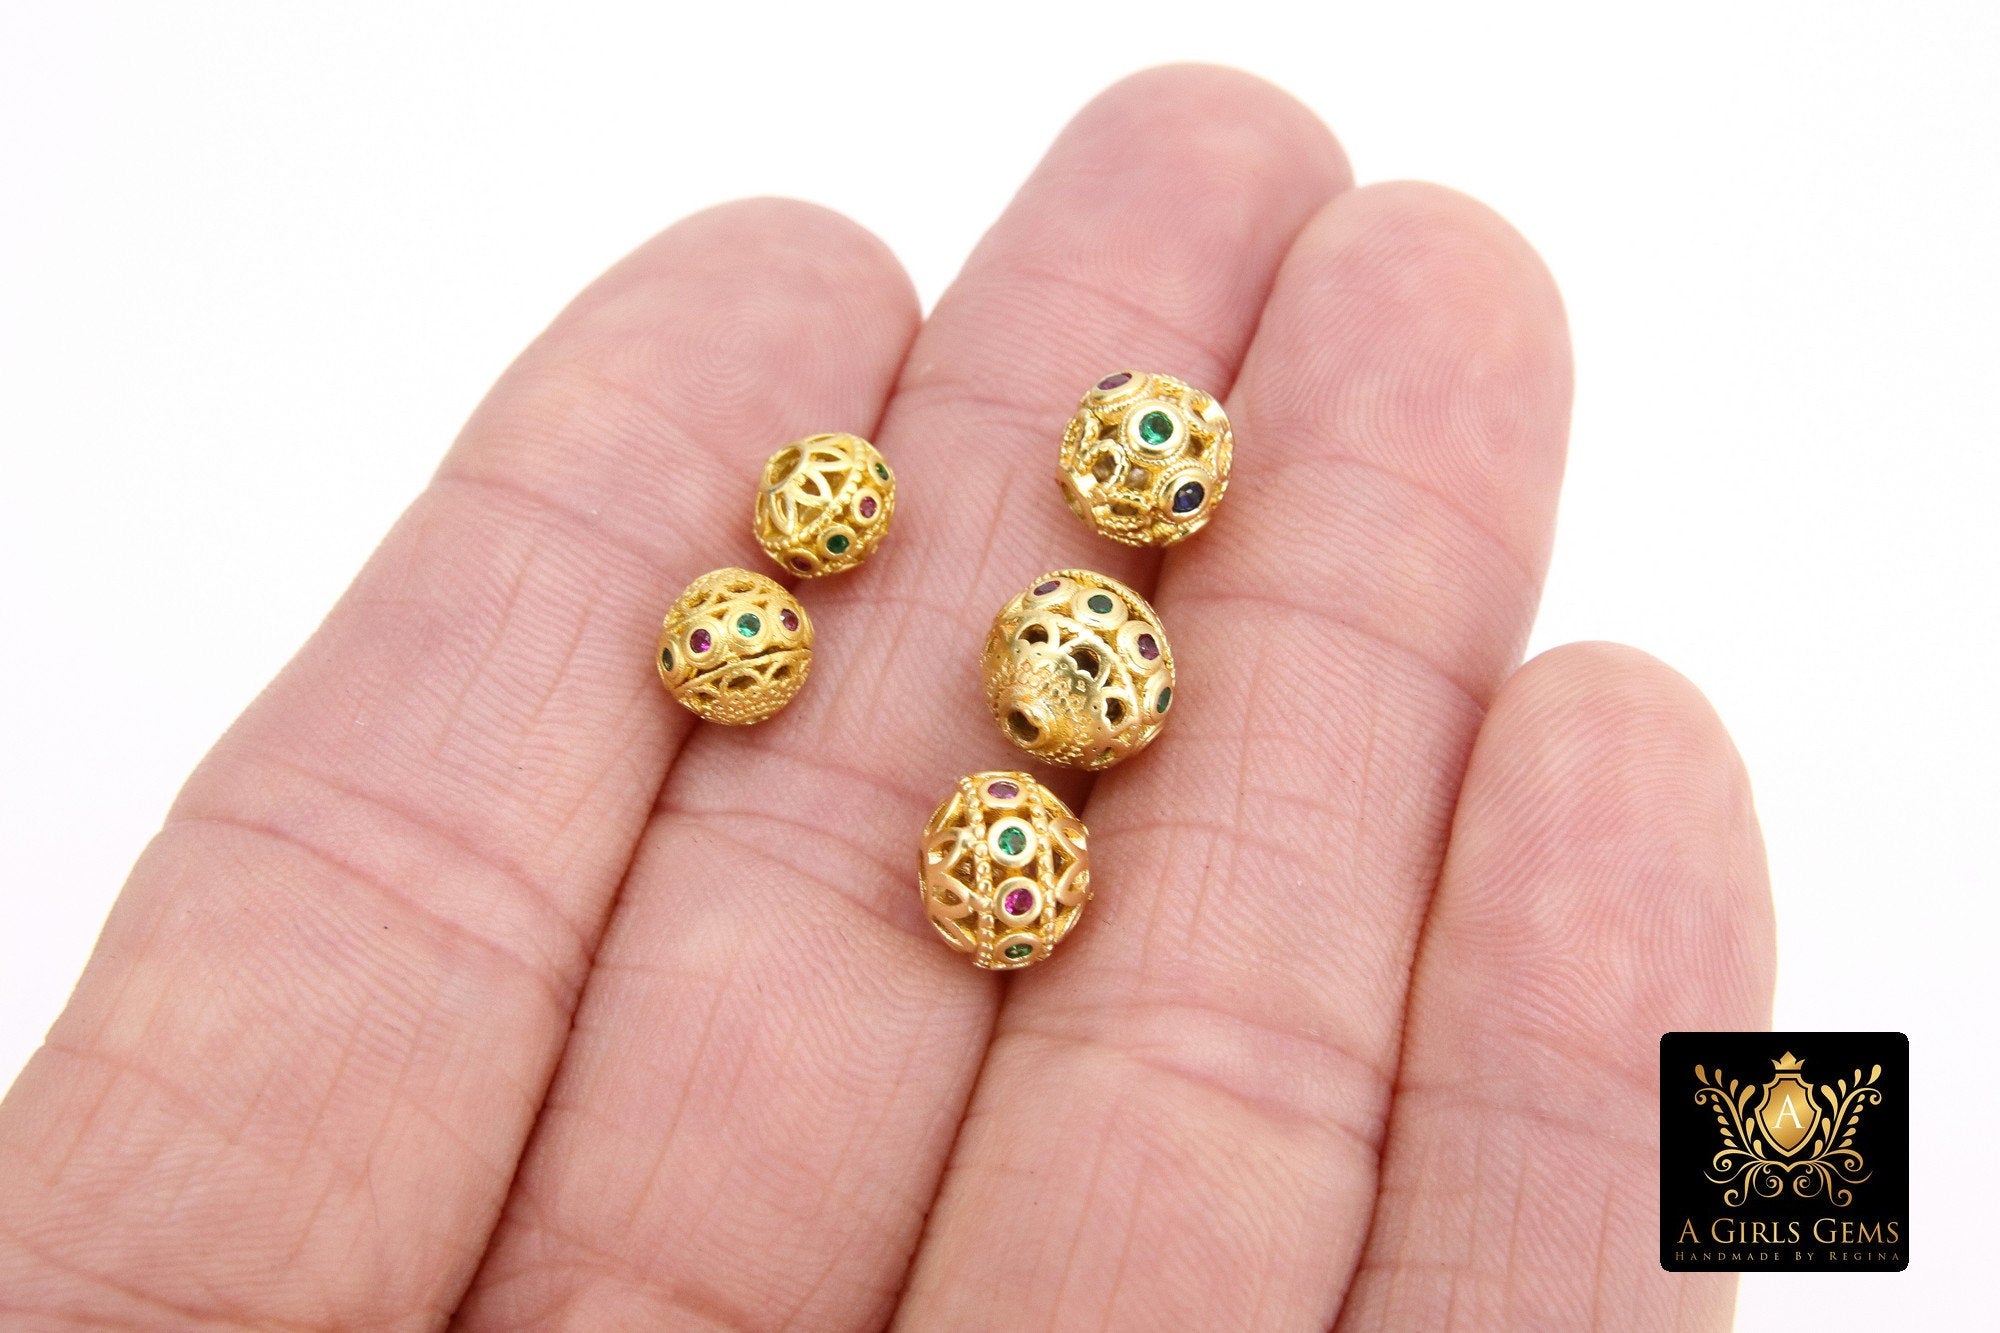 CZ Pave Gold Round Filigree Beads, 2 Pc Patterned Silver Metal Beads AG #3336,0 Round High Quality 8 mm Focal Beads, Jewelry Findings